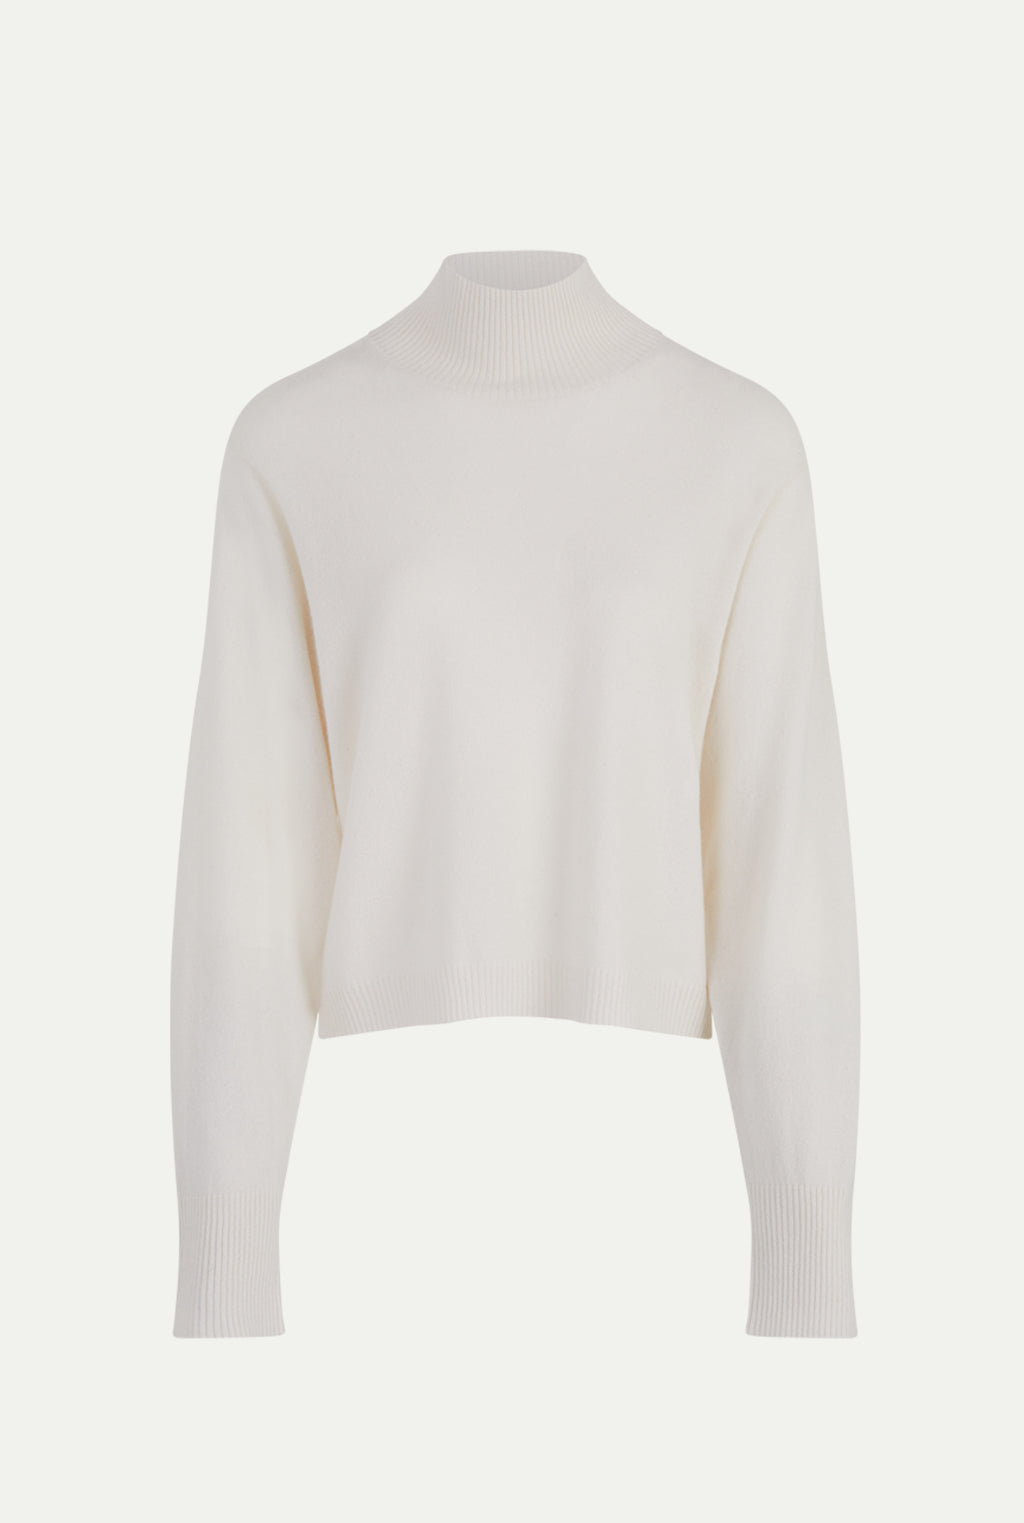 VAIL cashmere sweater